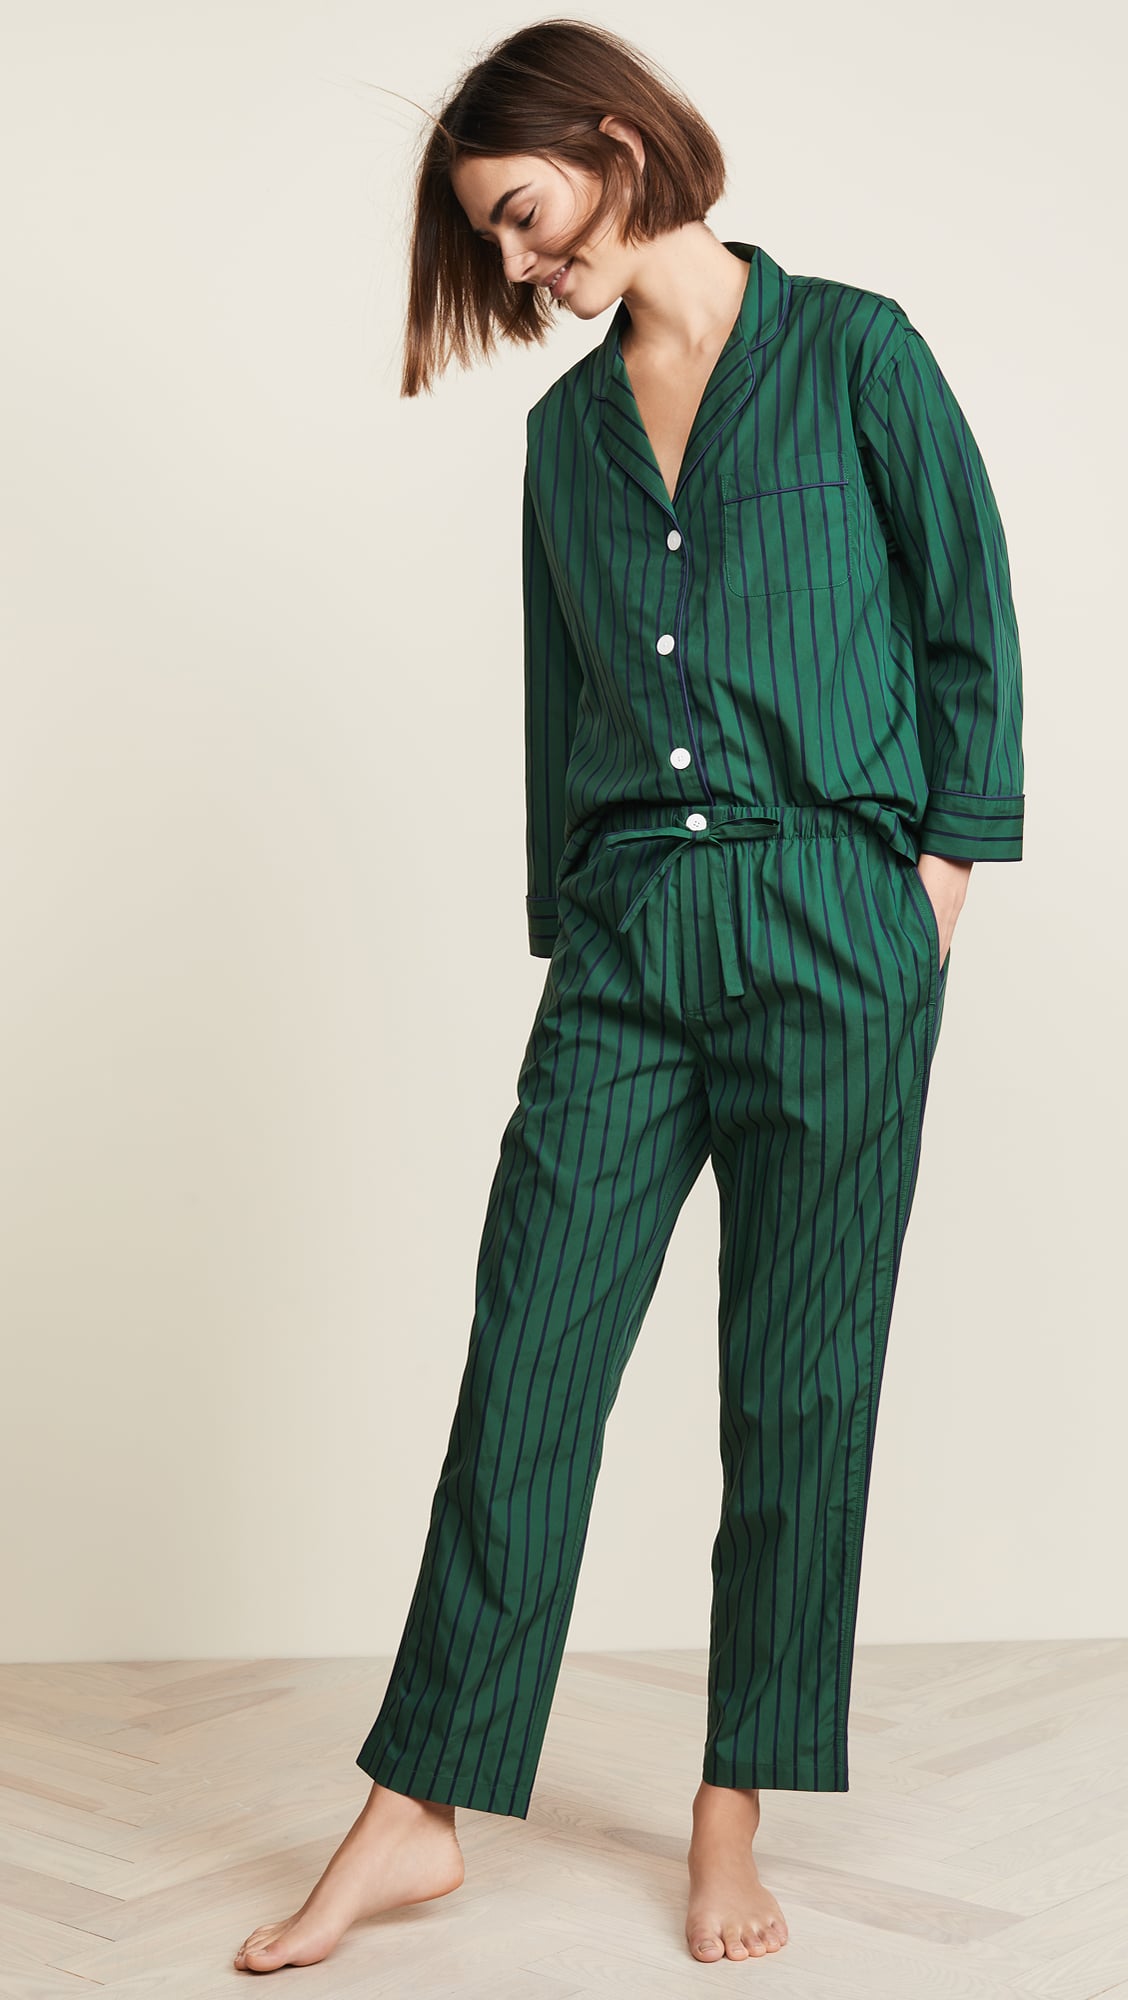 Sleepy Jones Marina Pajama Shirt and Pants | These 16 Adorable Pajamas Are  Just Another Excuse Not to Leave Your House This Winter | POPSUGAR Fashion  Photo 9